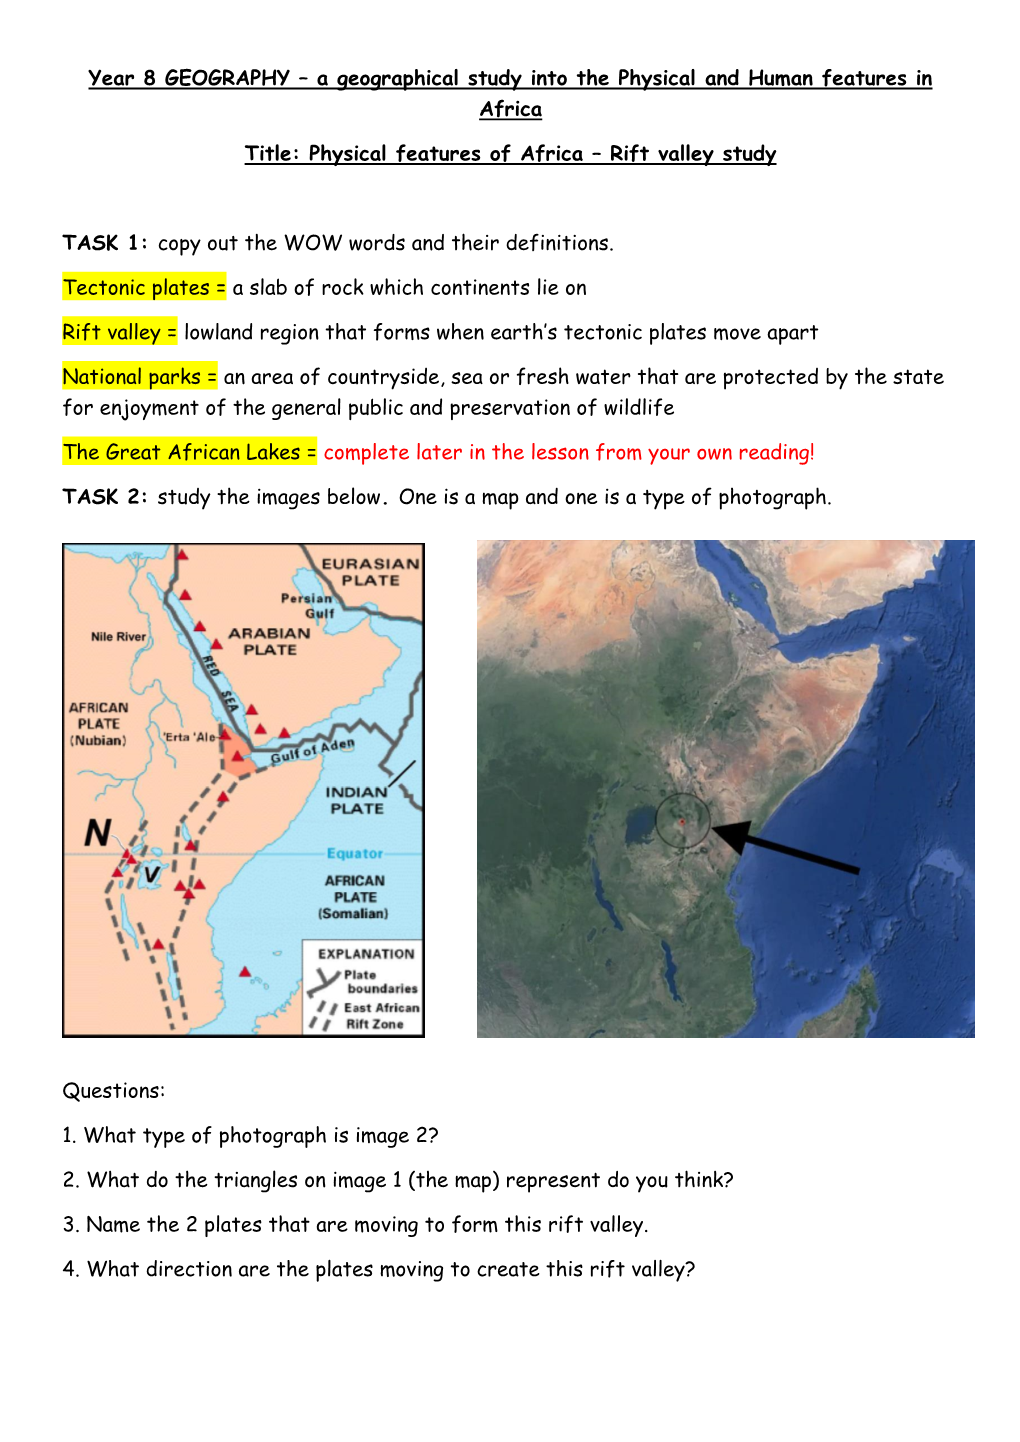 Year 8 GEOGRAPHY – a Geographical Study Into the Physical and Human Features in Africa